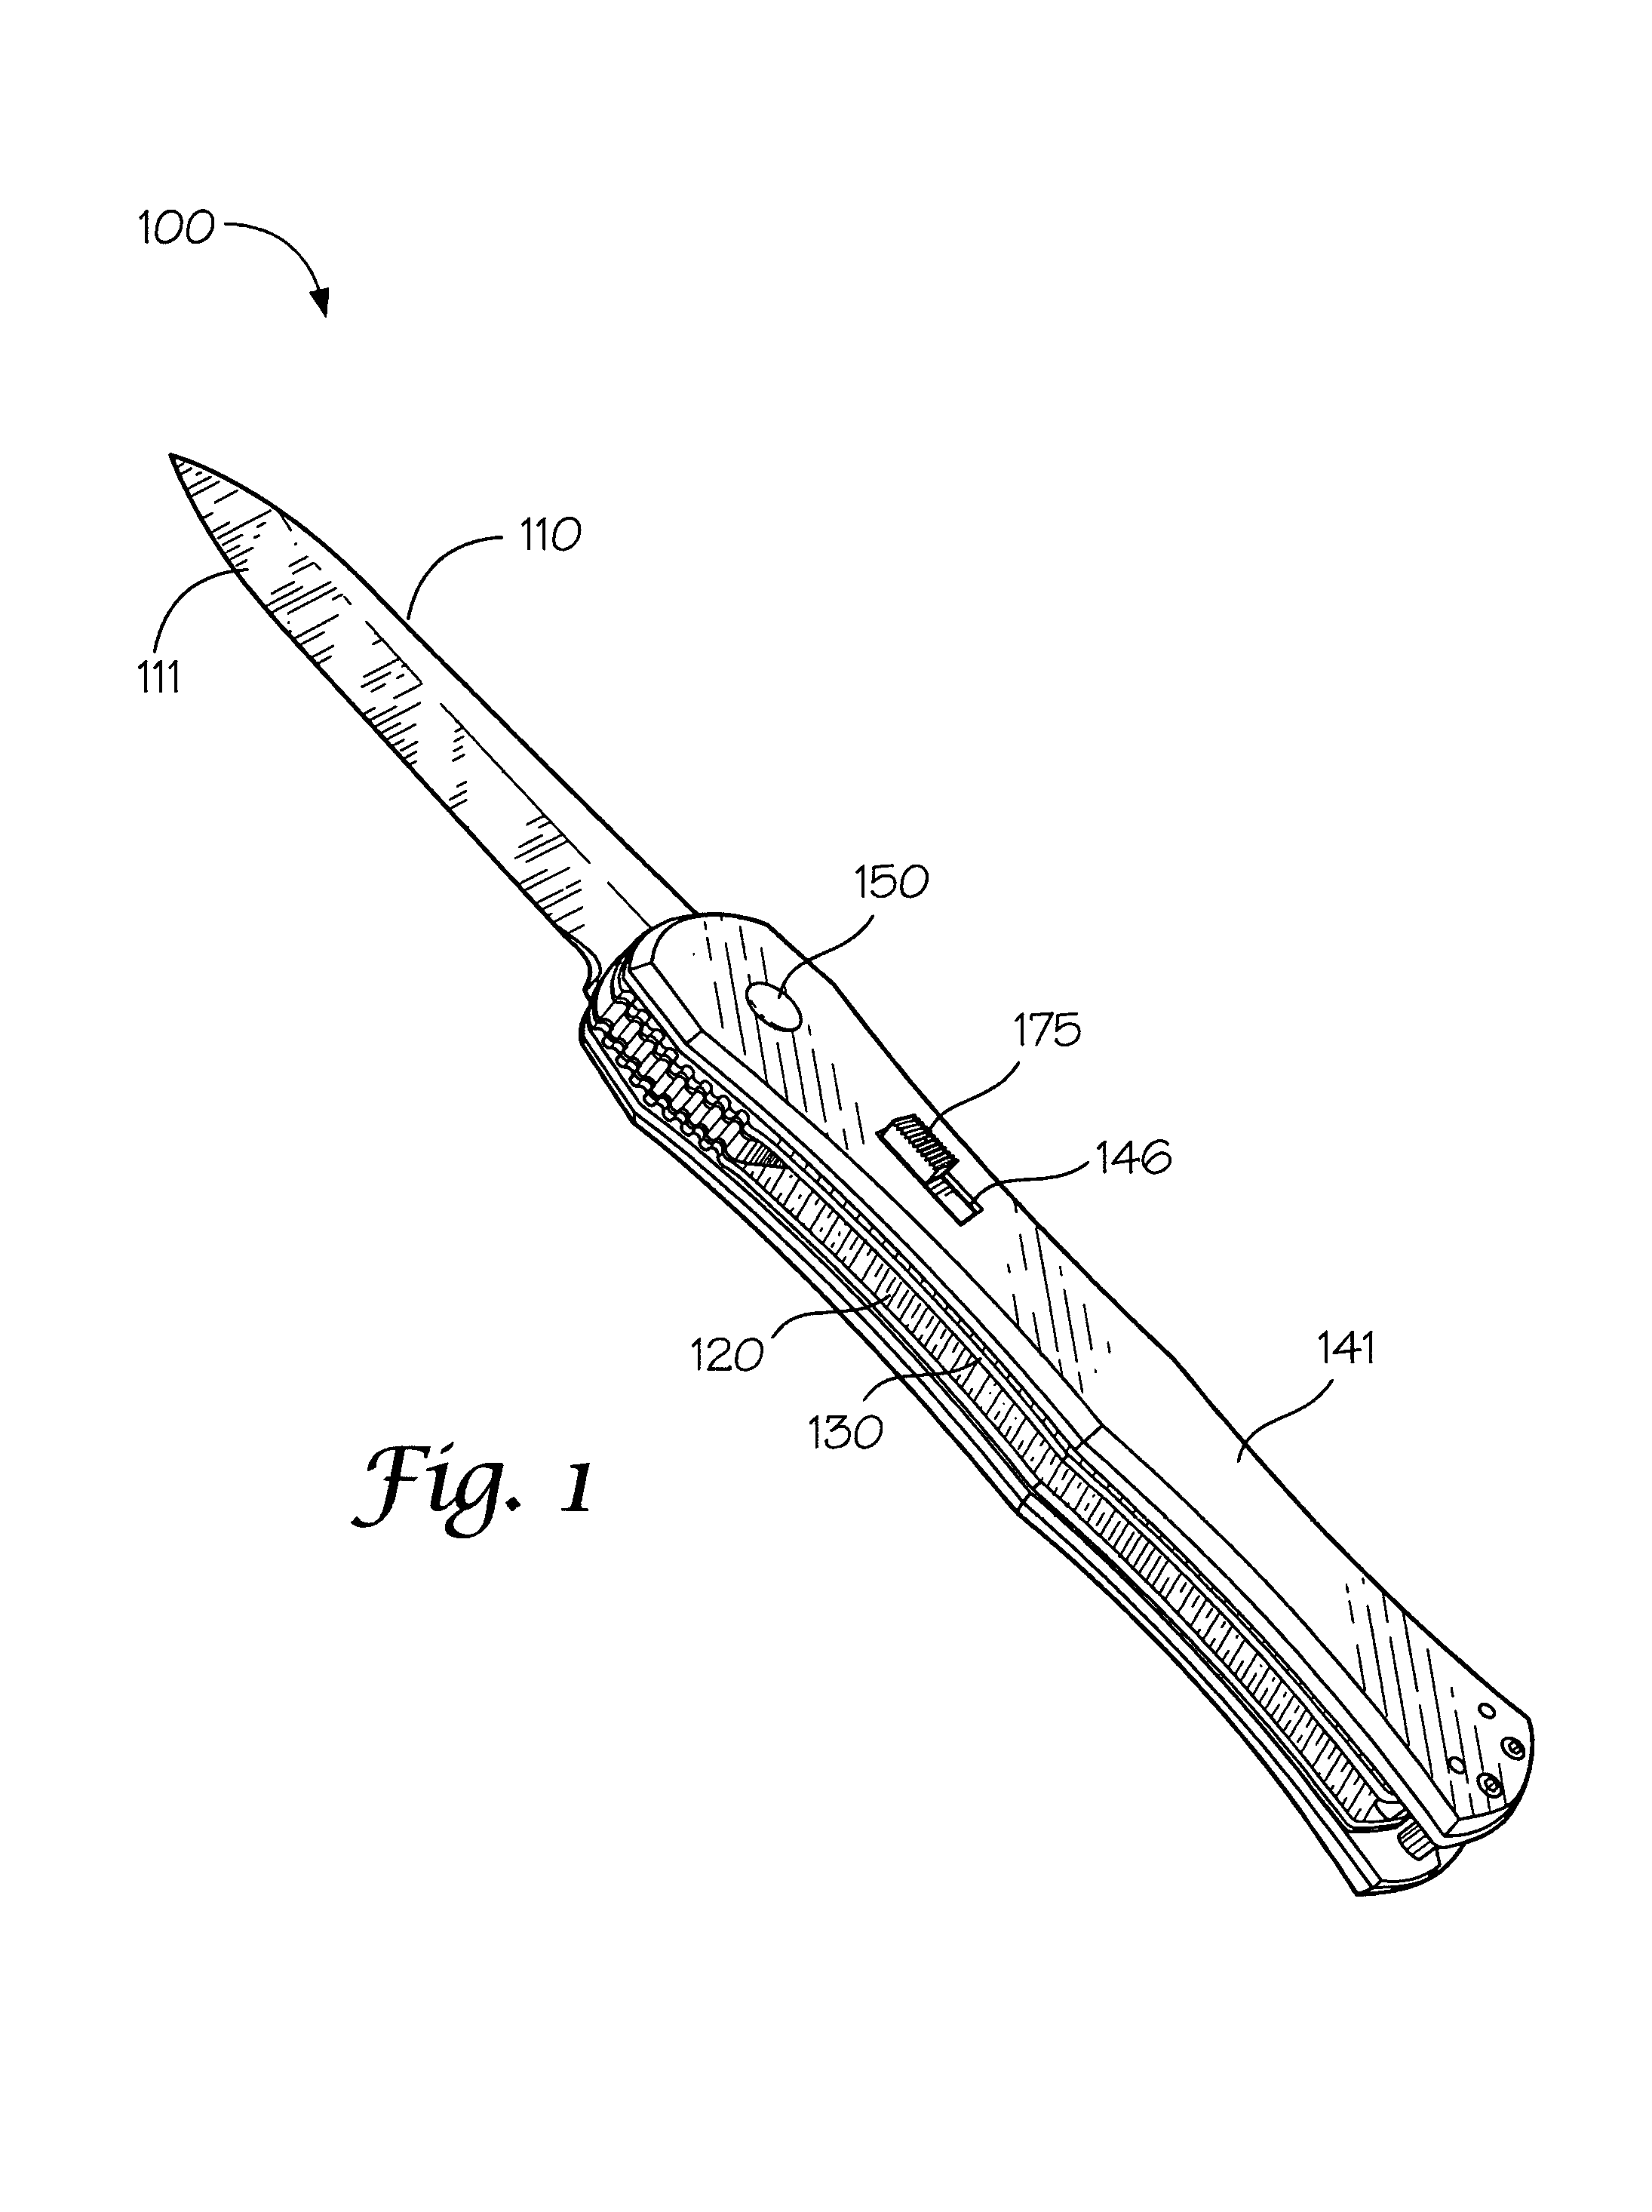 Folding knife with pivoting blade and guard